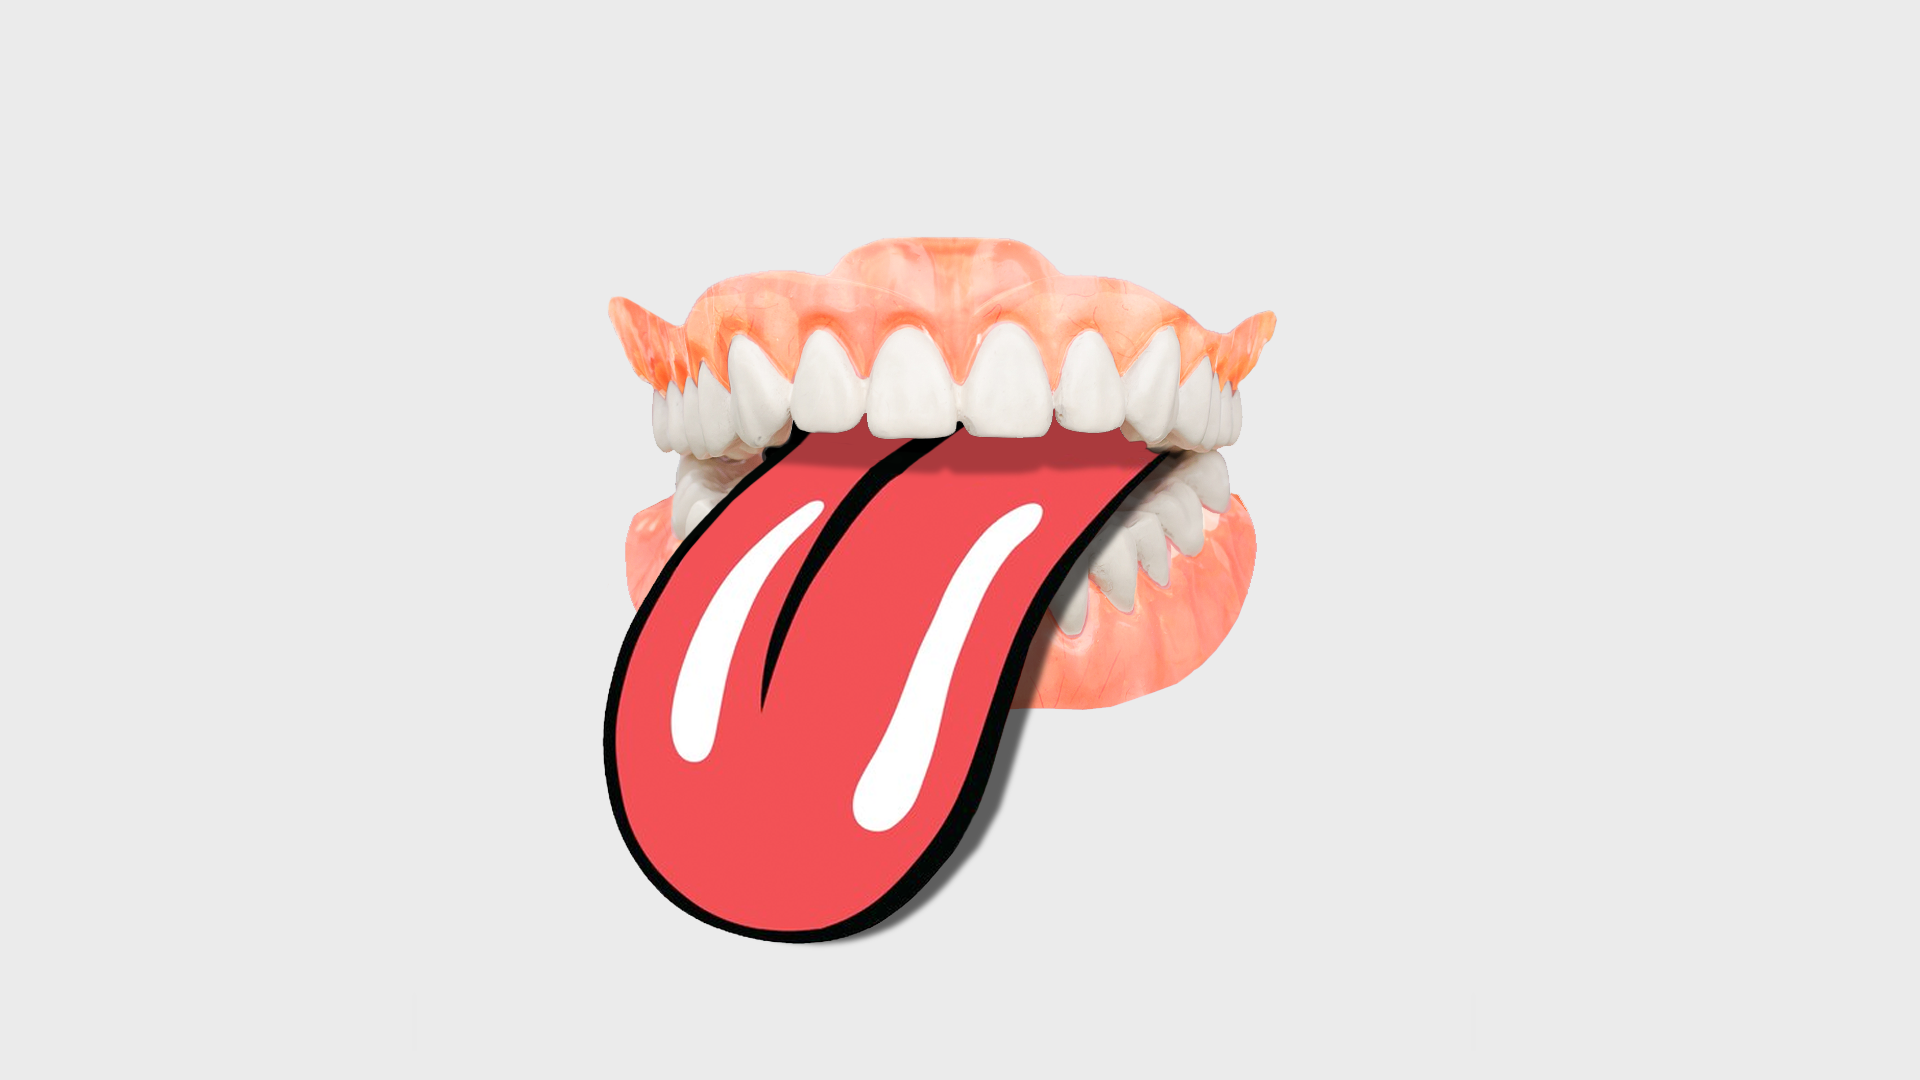 Illustration of a set of dentures with the Rolling Stones tongue hanging out.